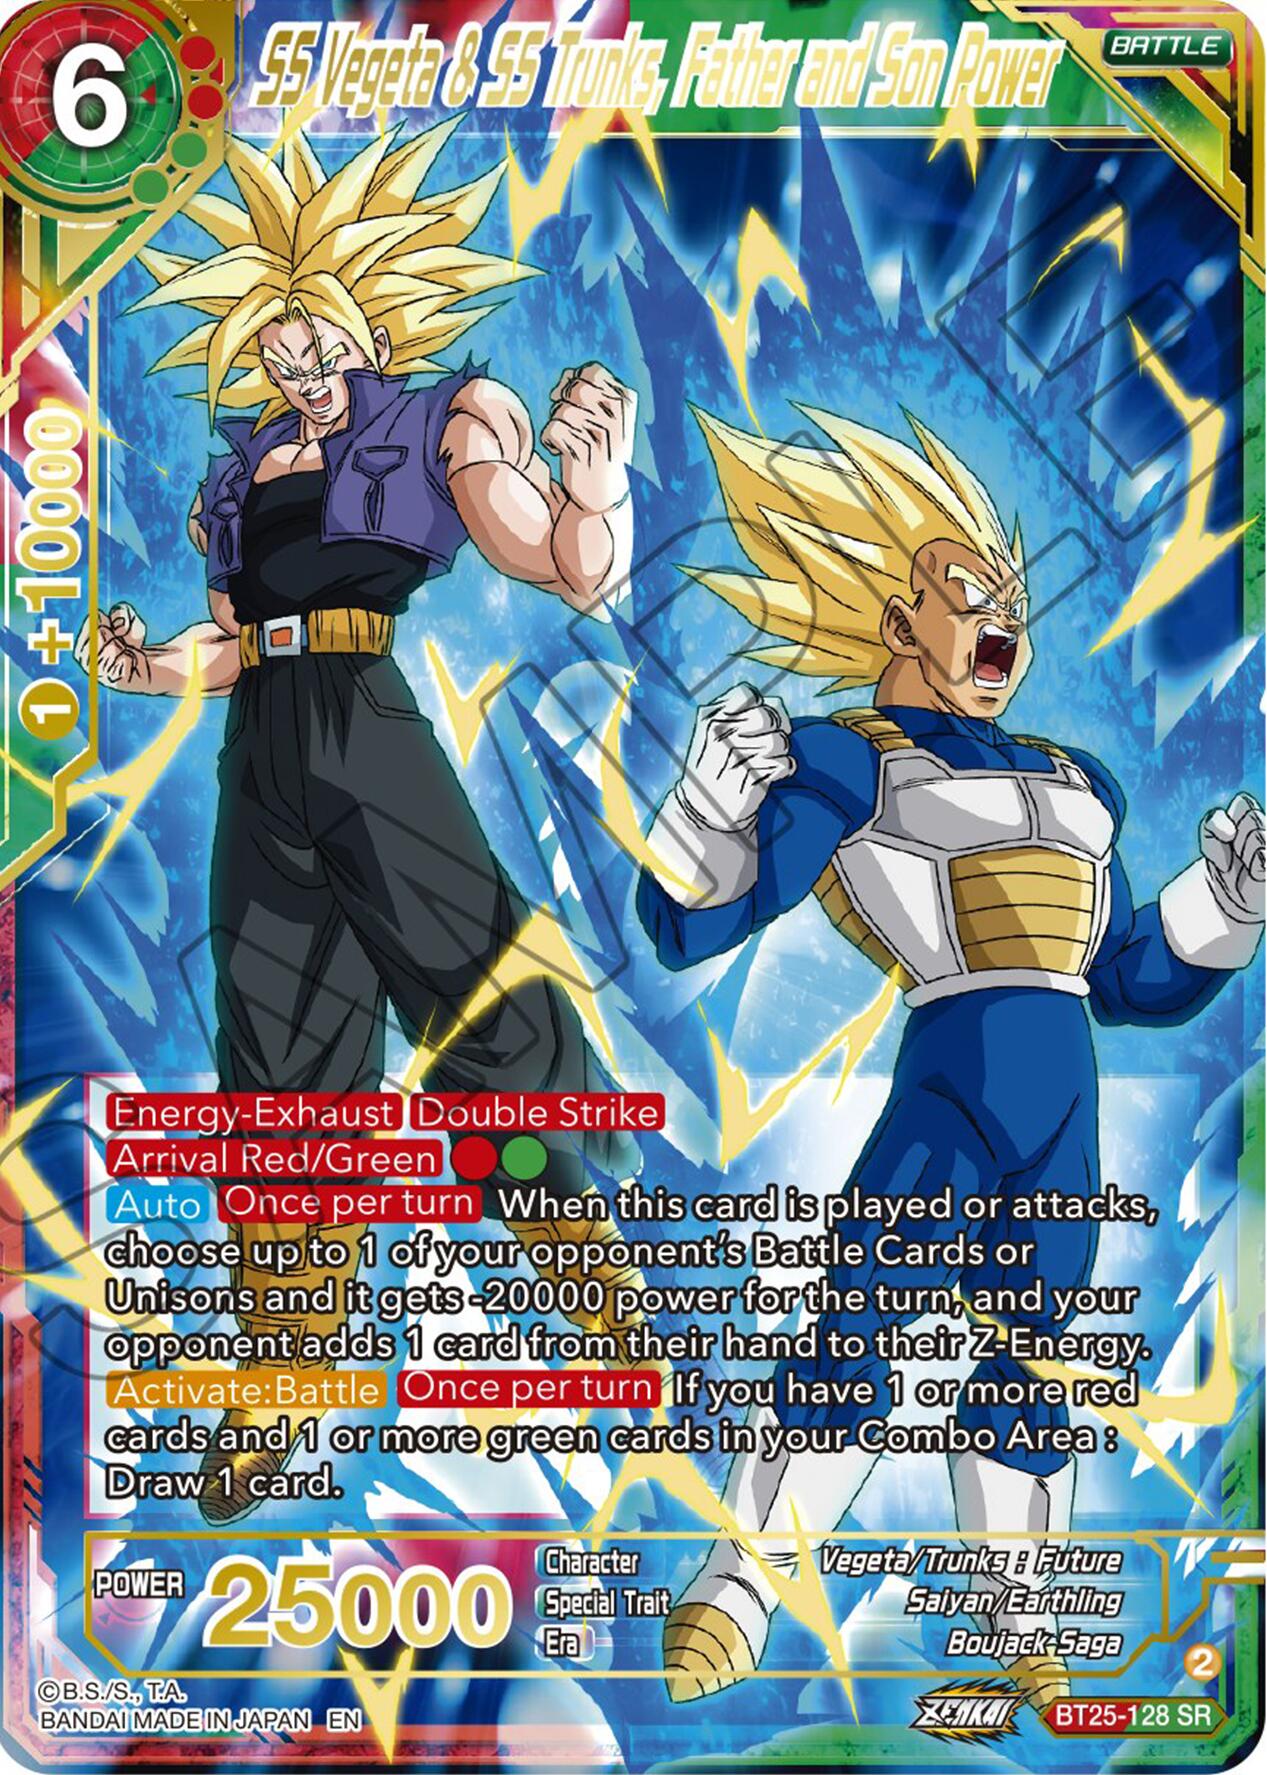 SS Vegeta & SS Trunks, Father and Son Power (BT25-128) [Legend of the Dragon Balls] | Sanctuary Gaming